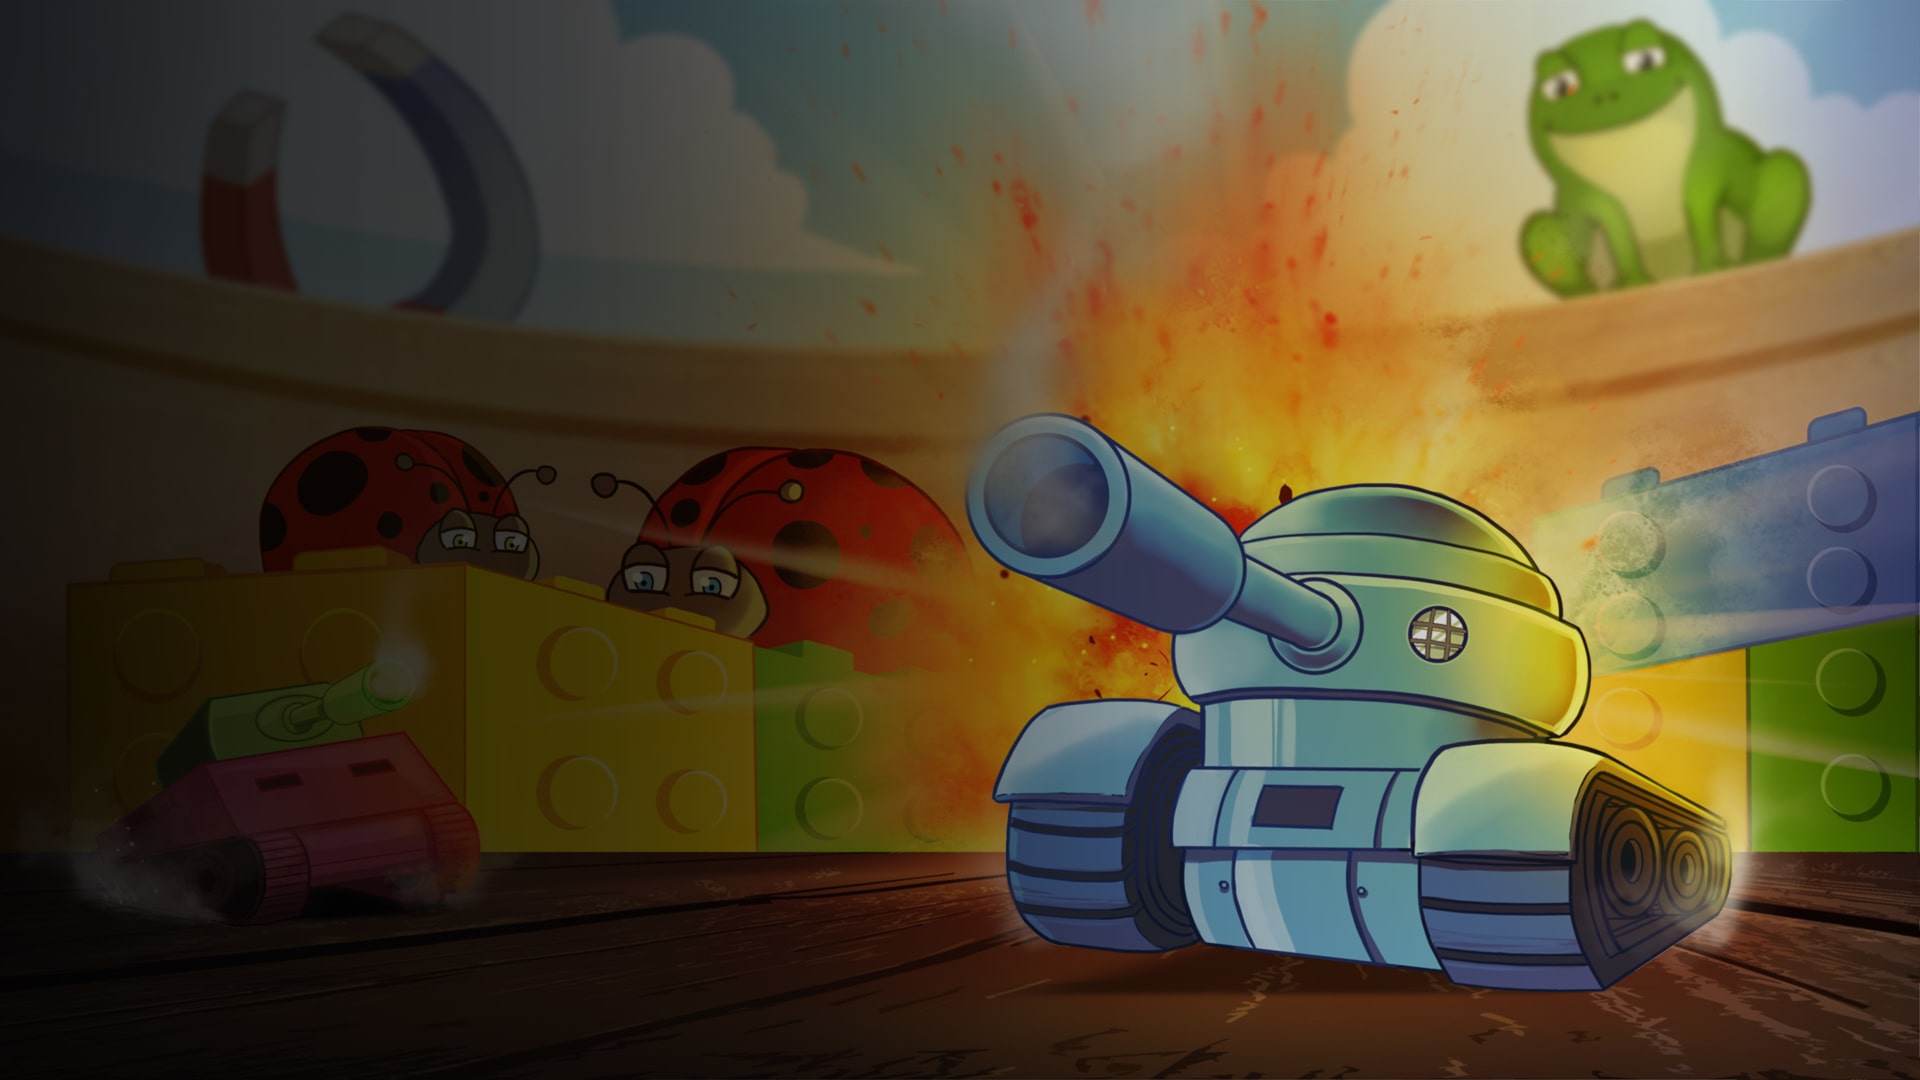 Attack of the Toy Tanks (English/Chinese/Korean/Japanese Ver.)